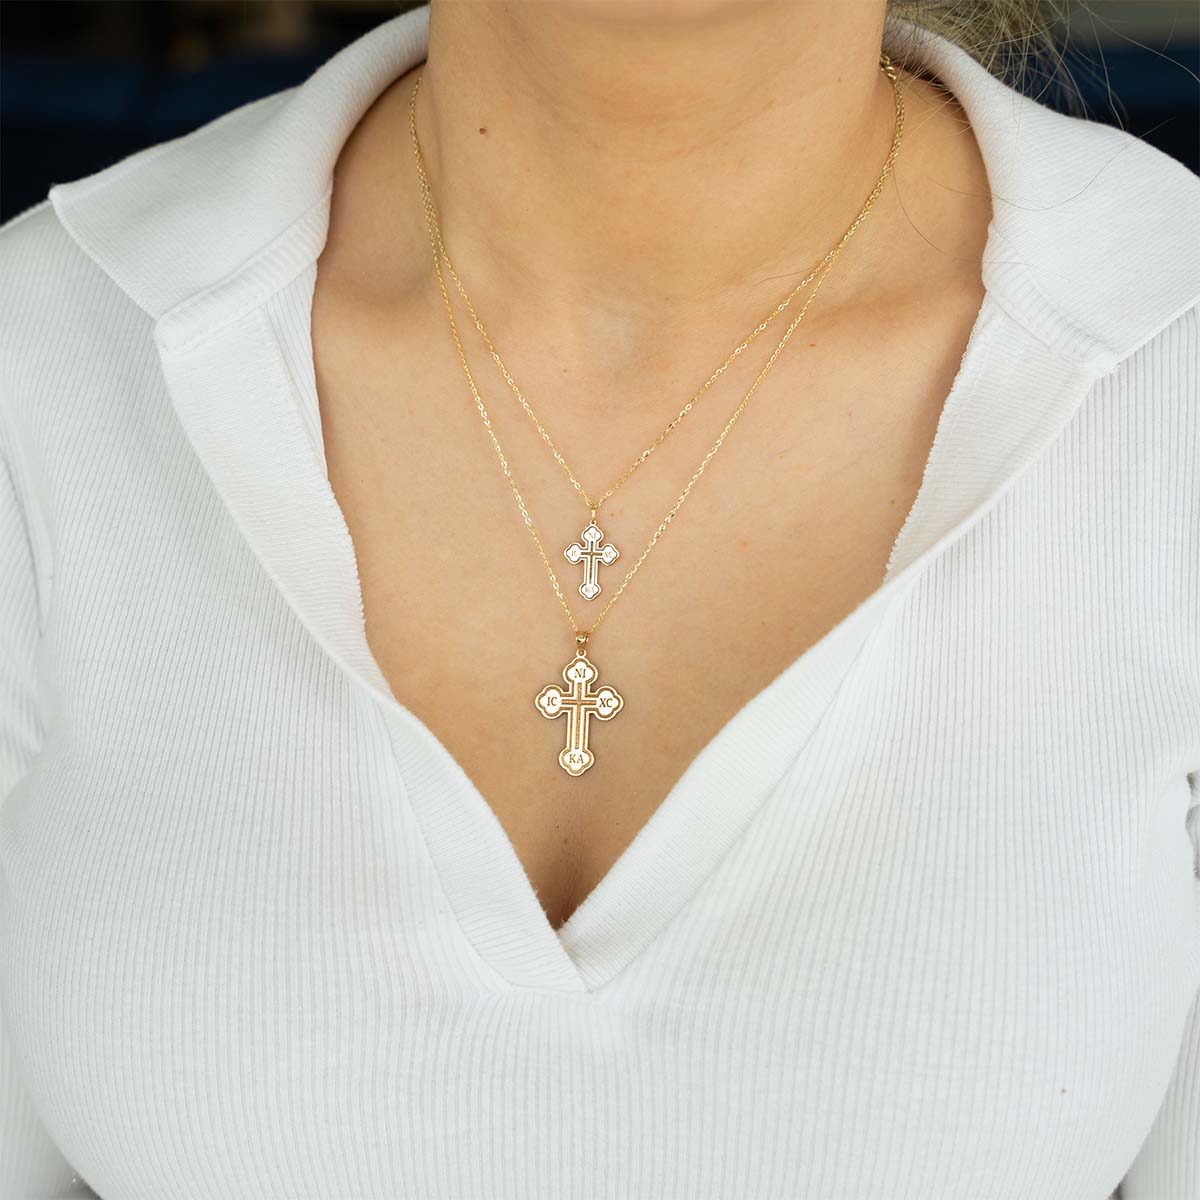 Outlined Greek Orthodox Cross Necklace